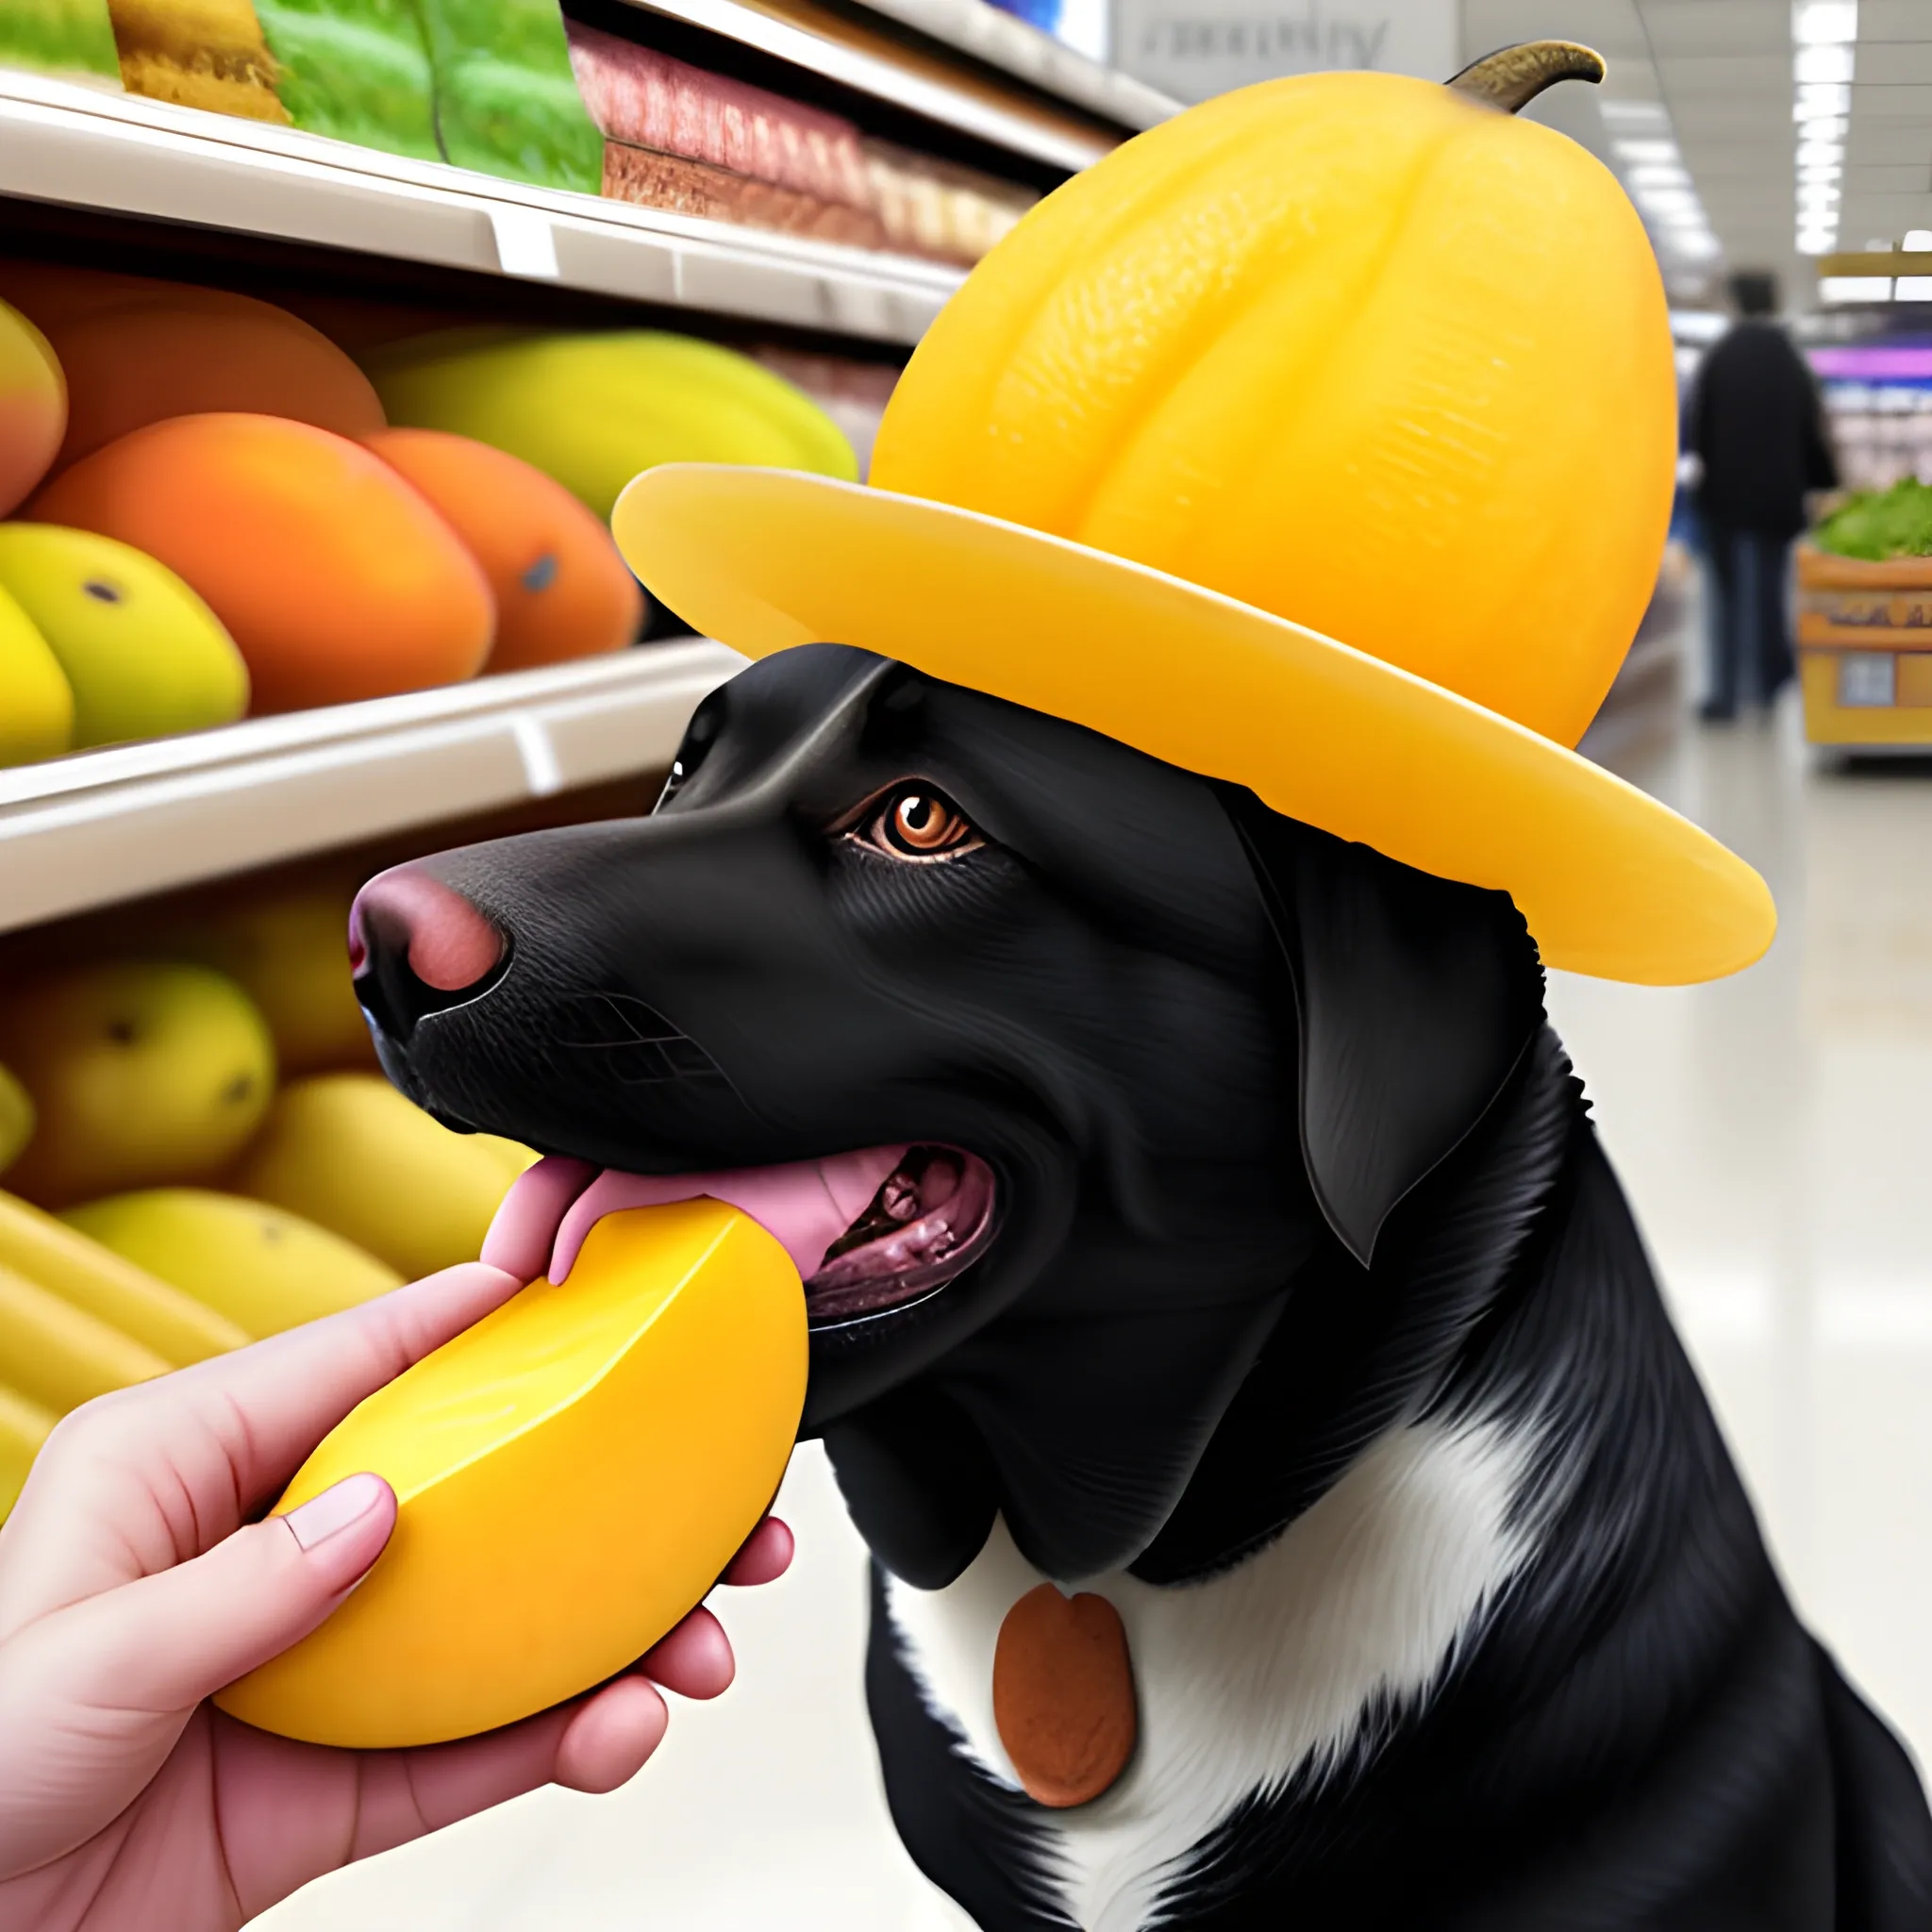 I want you to draw a dog sucking mango in the supermarket